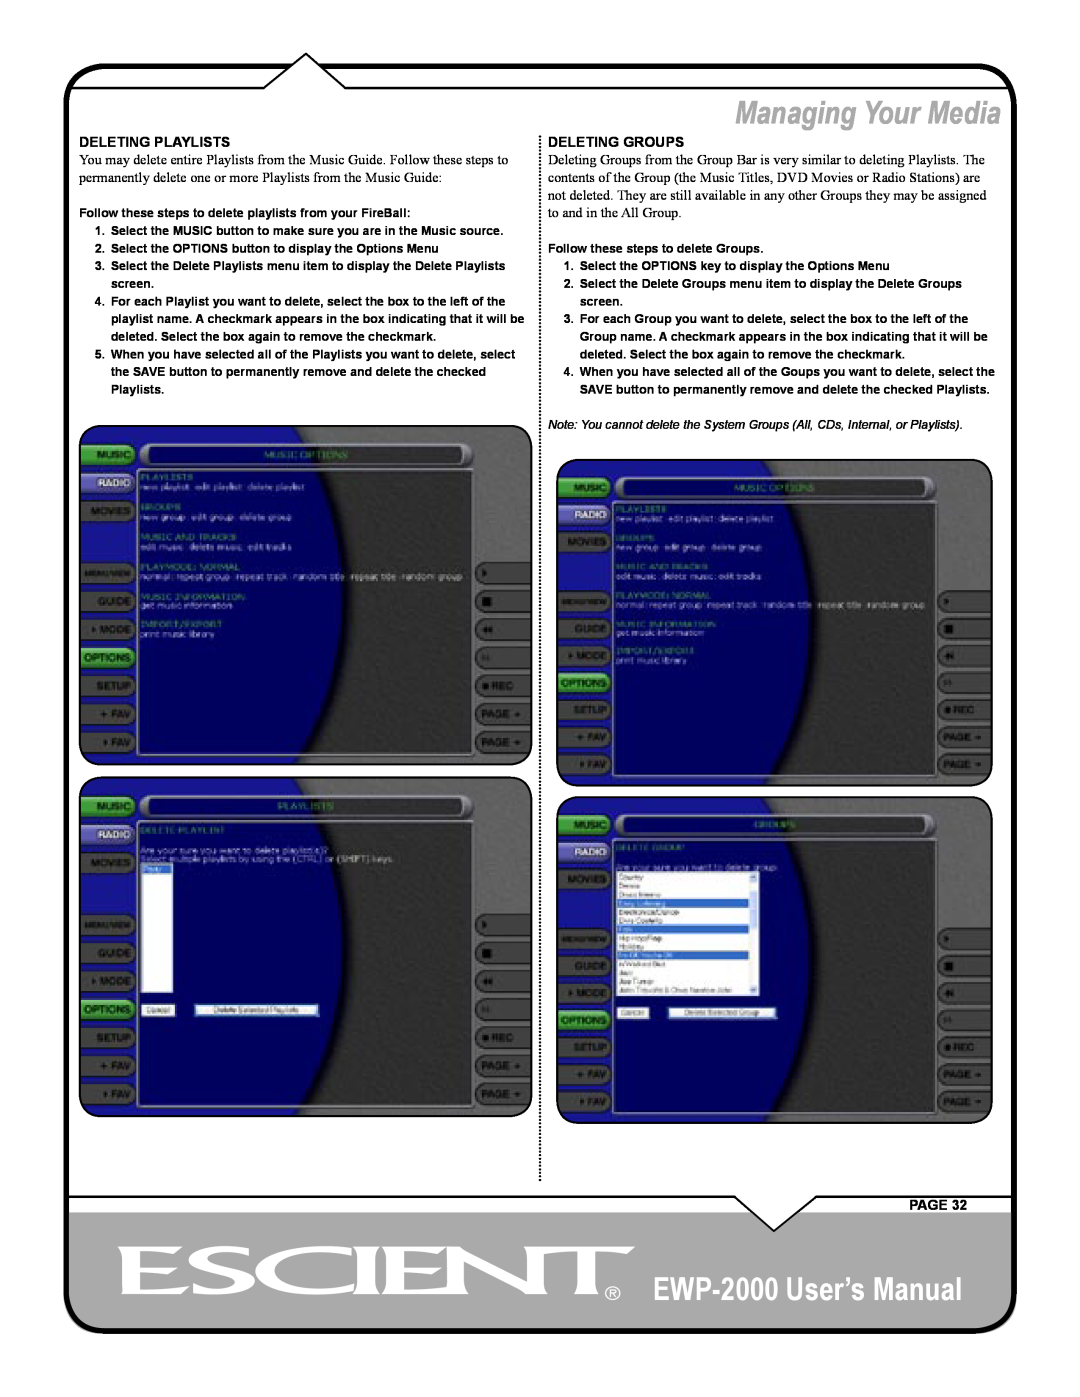 Escient user manual Managing Your Media, EWP-2000 User’s Manual, Deleting Playlists, Deleting Groups, Page 